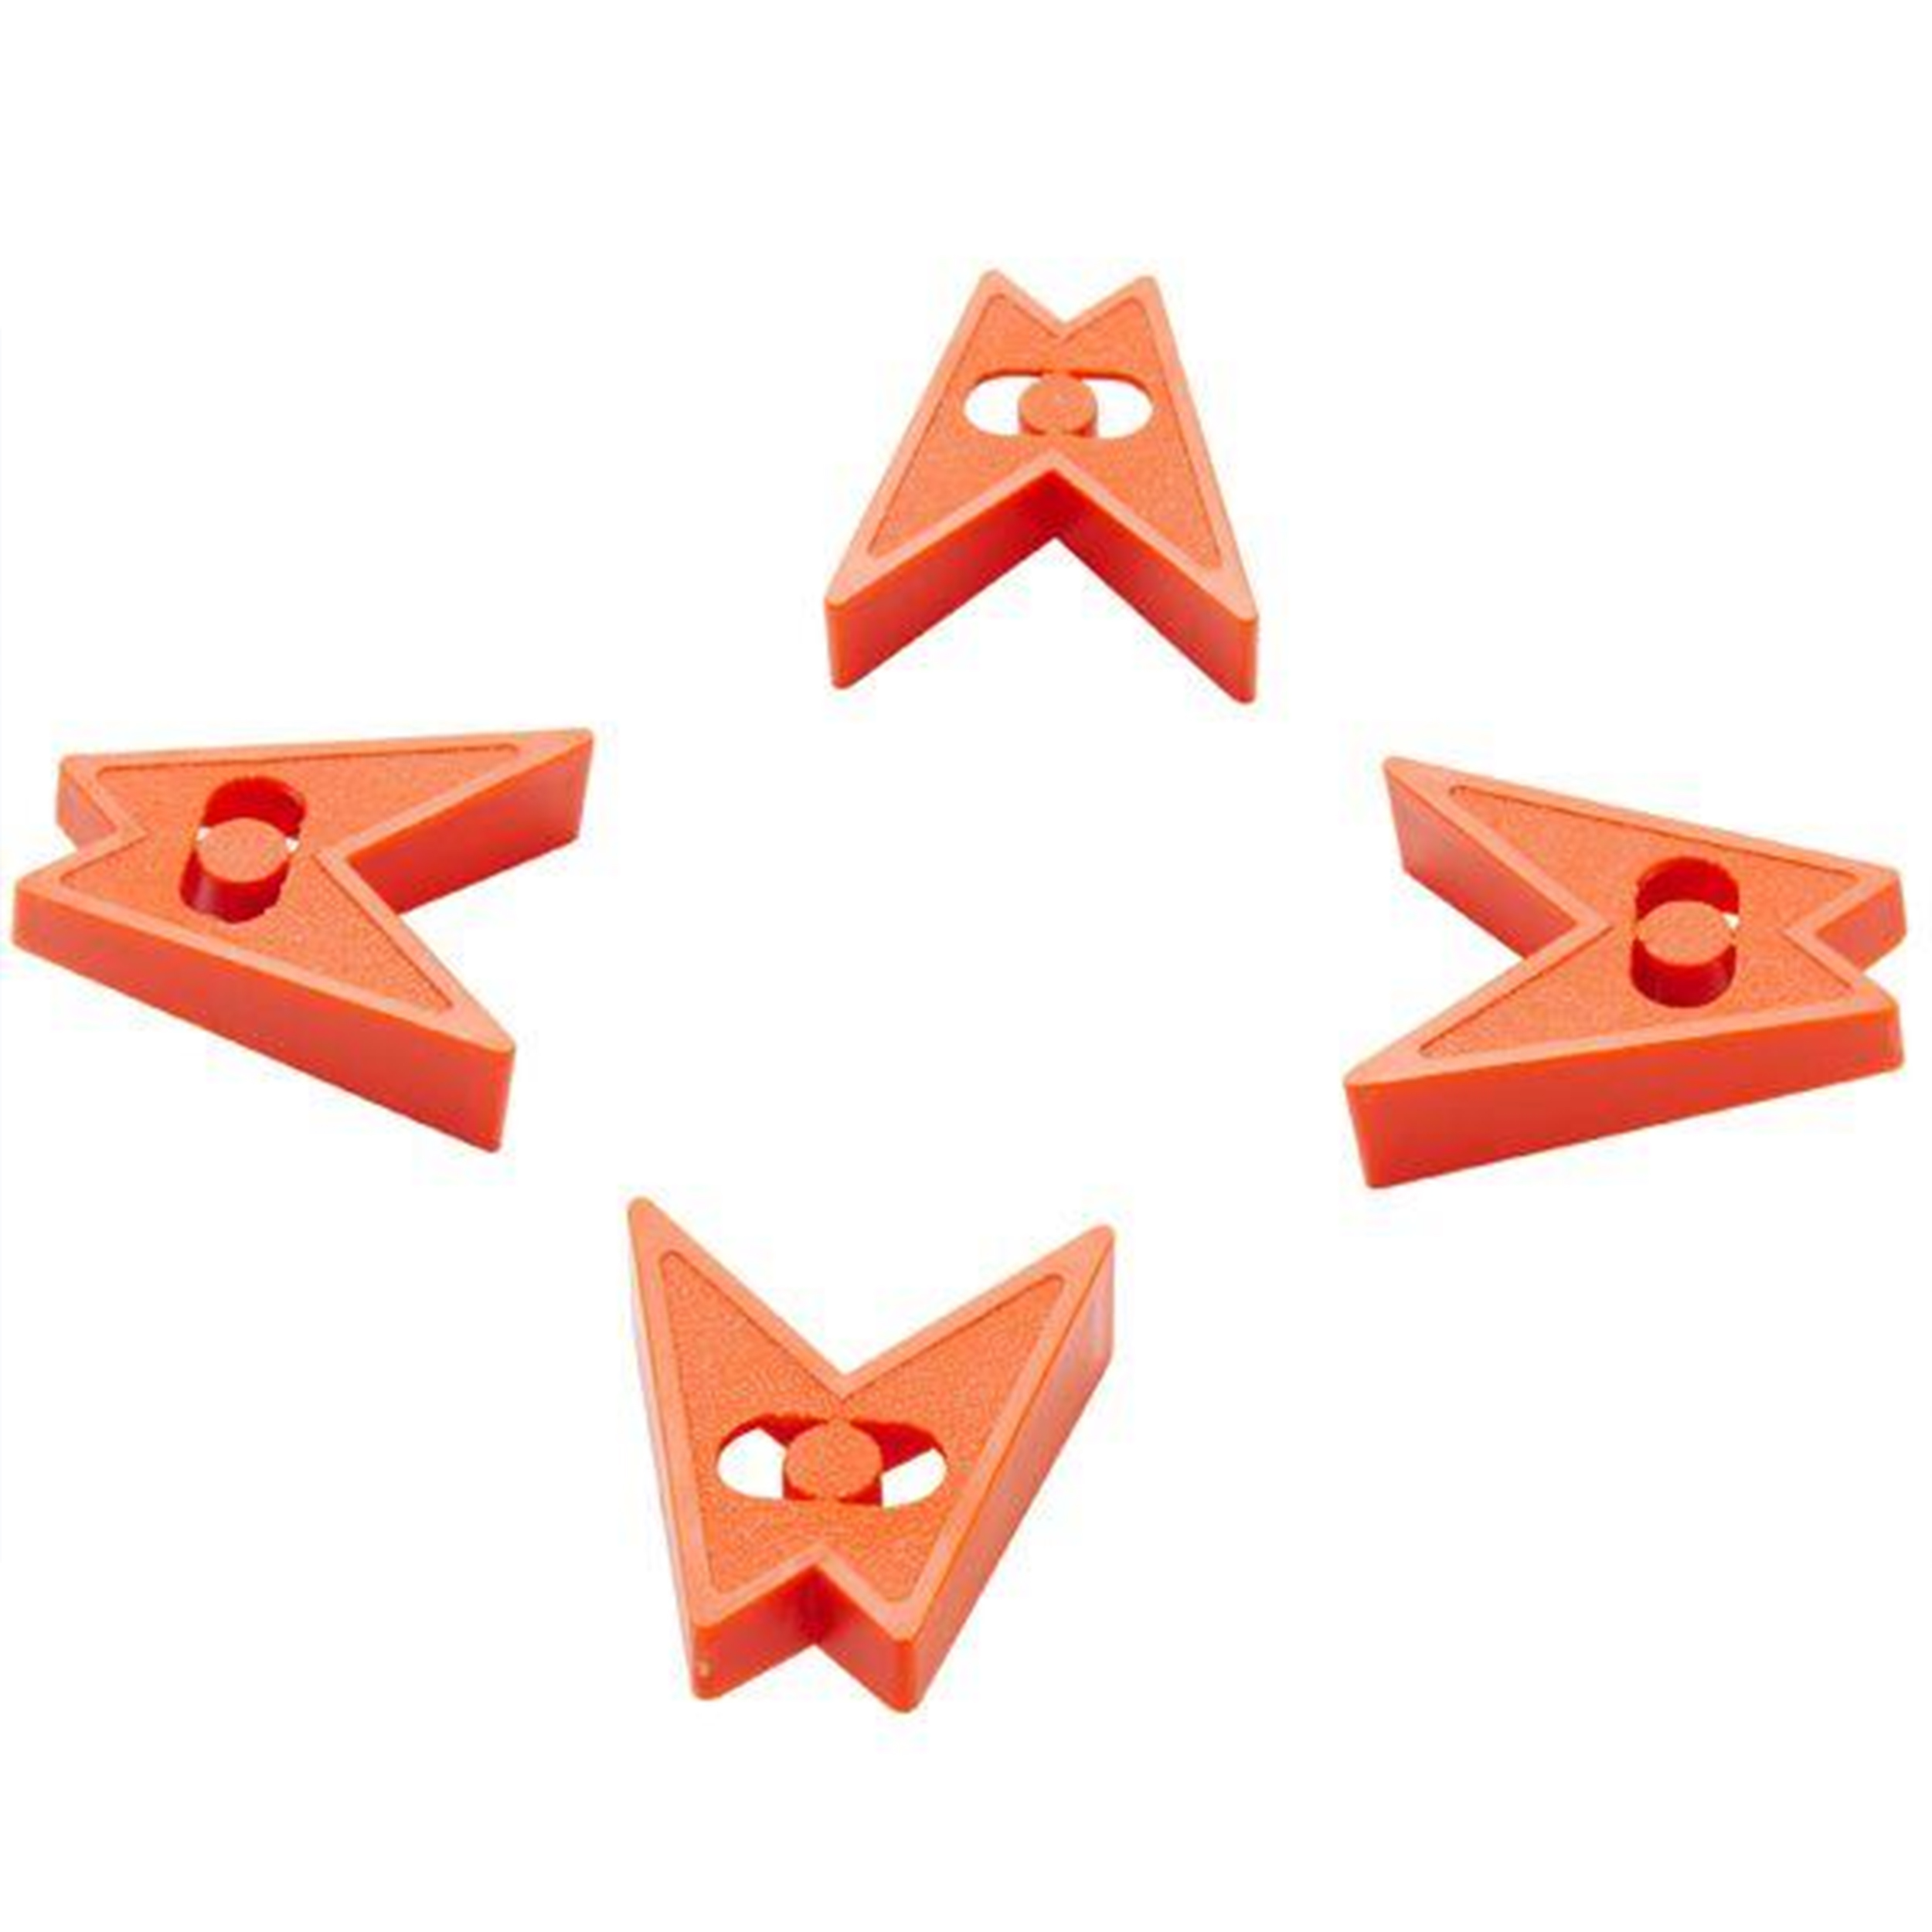 Extra Corners For Self-squaring Frame Clamp